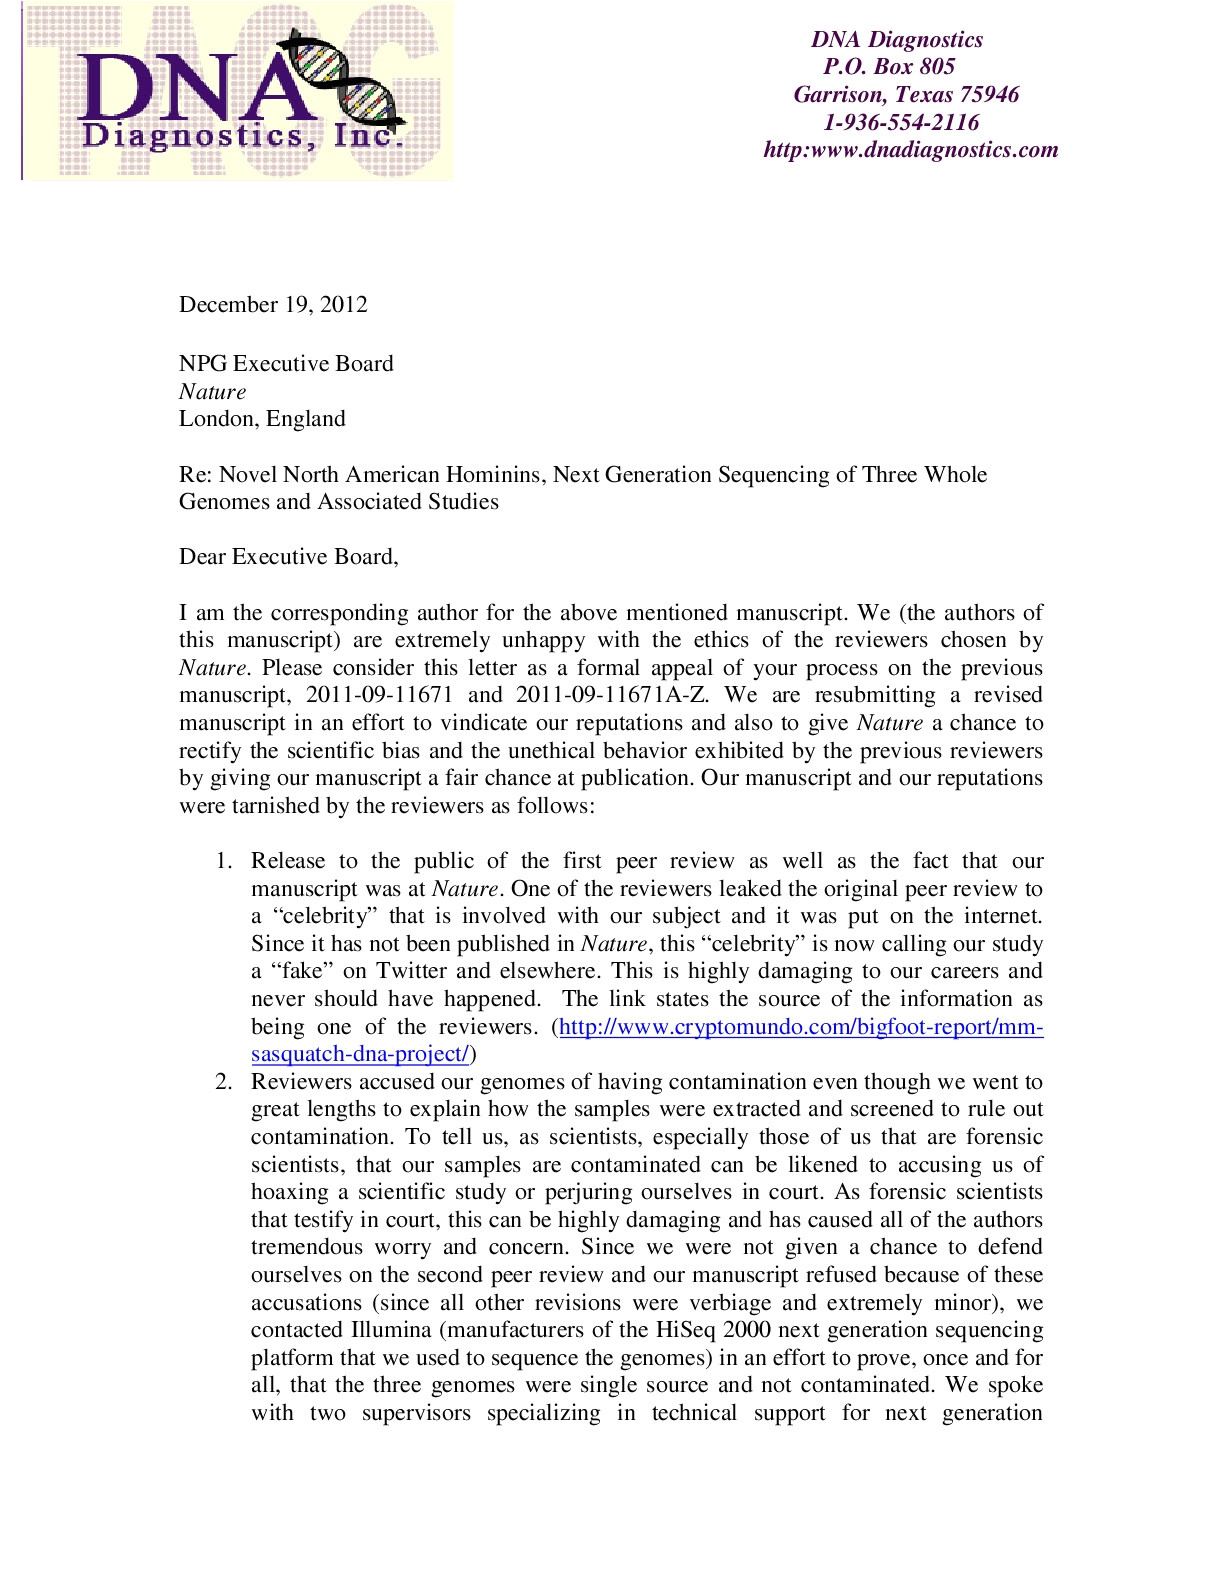 example cover letter for science magazine